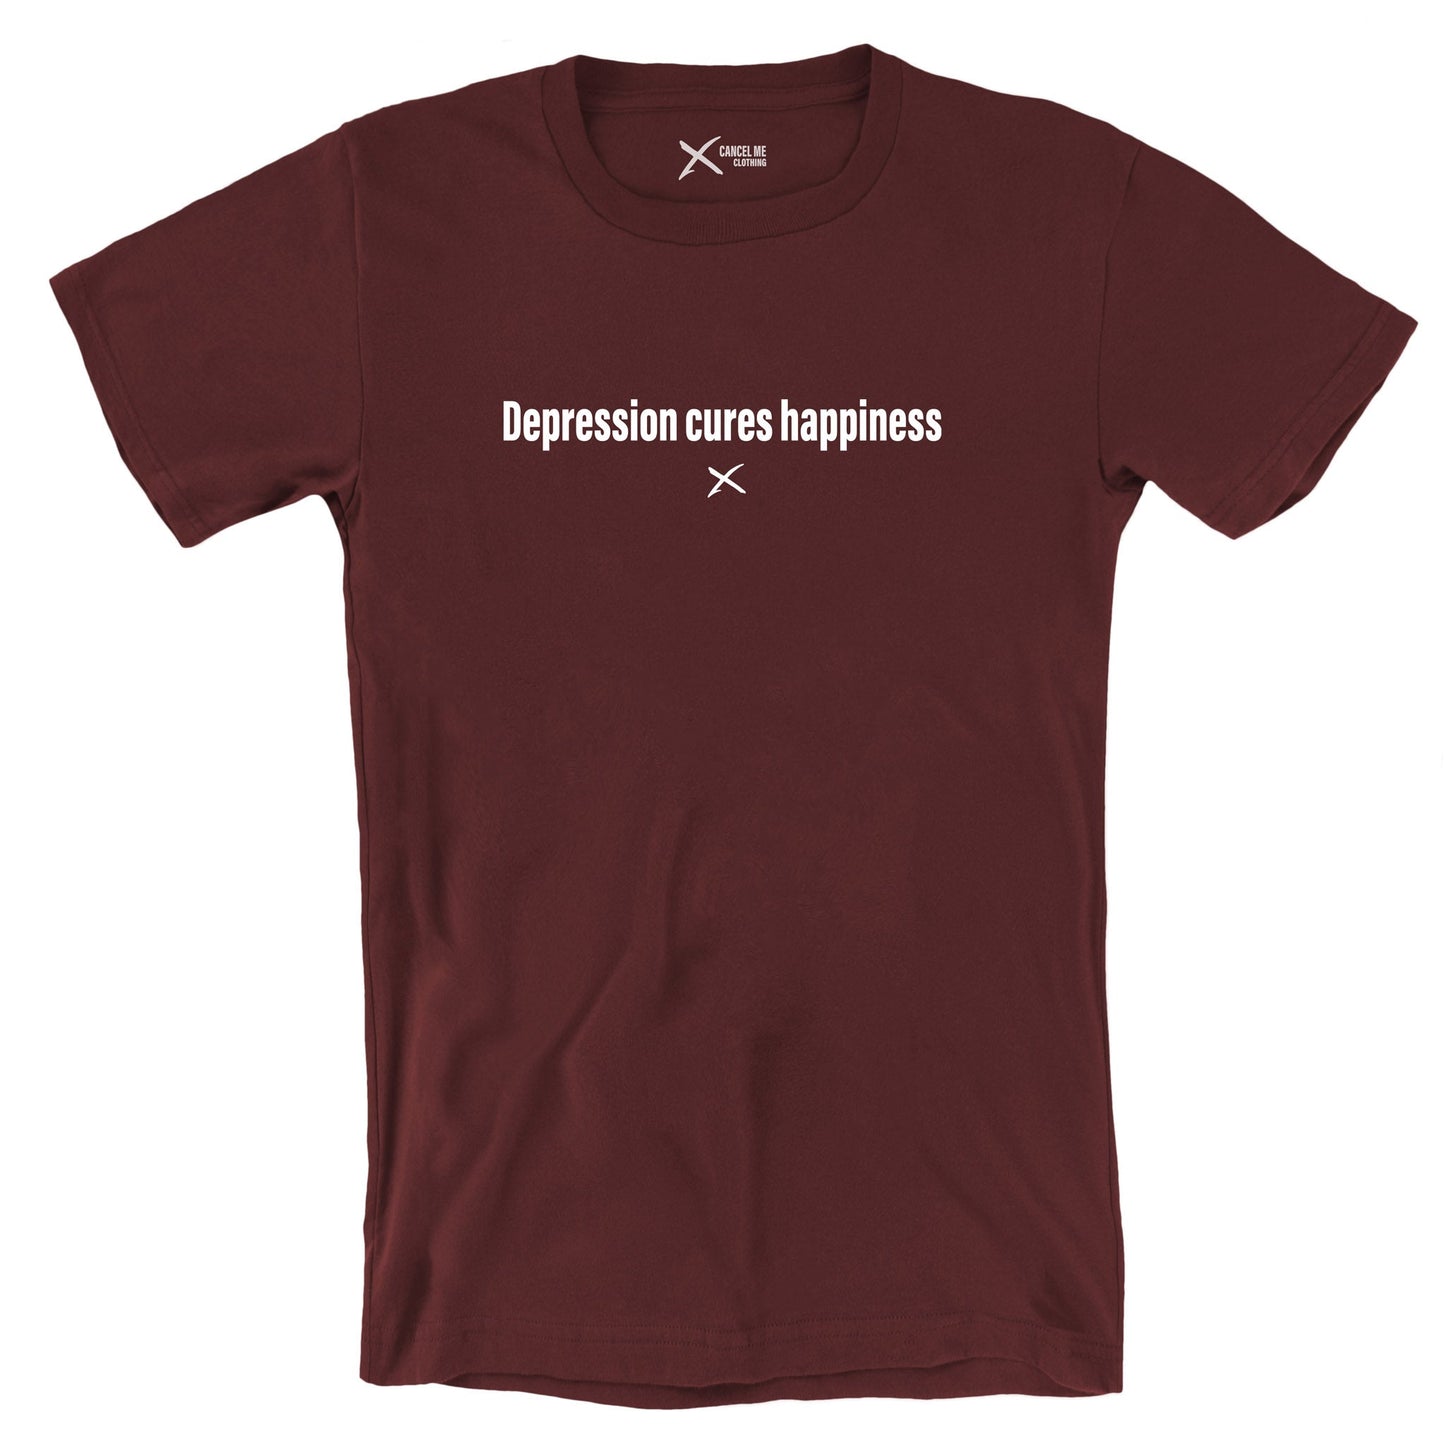 Depression cures happiness - Shirt